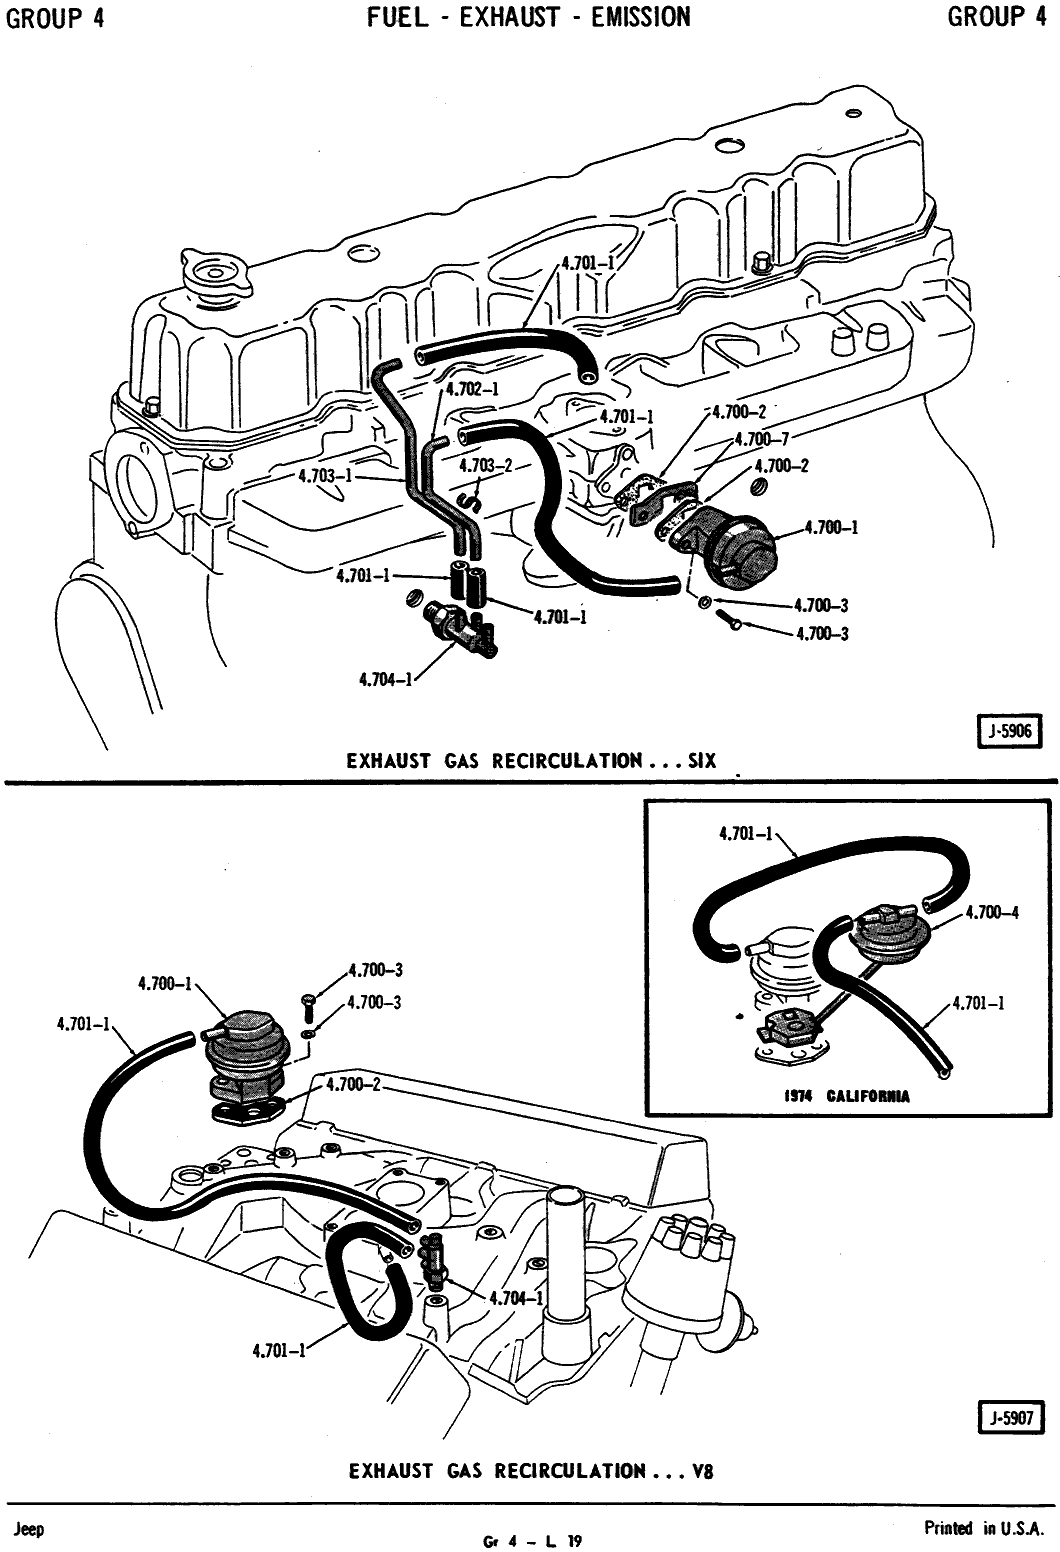 Jeep cherokee fuel system troubleshooting #3